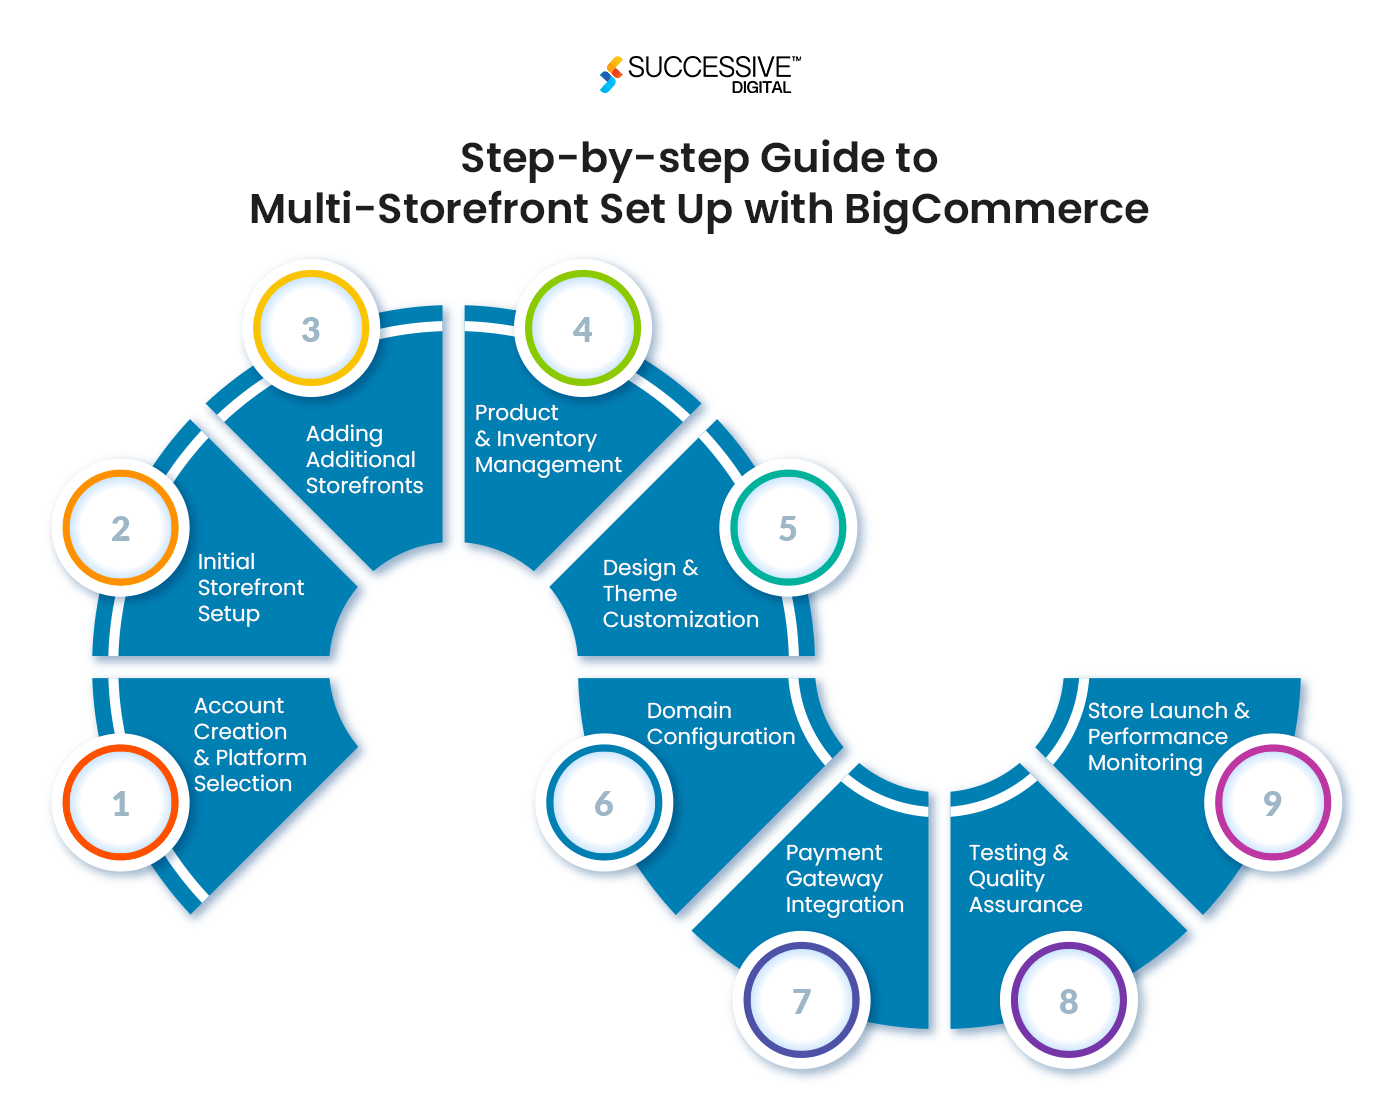 Step-by-step Guide to Multi-Storefront Set Up with BigCommerce